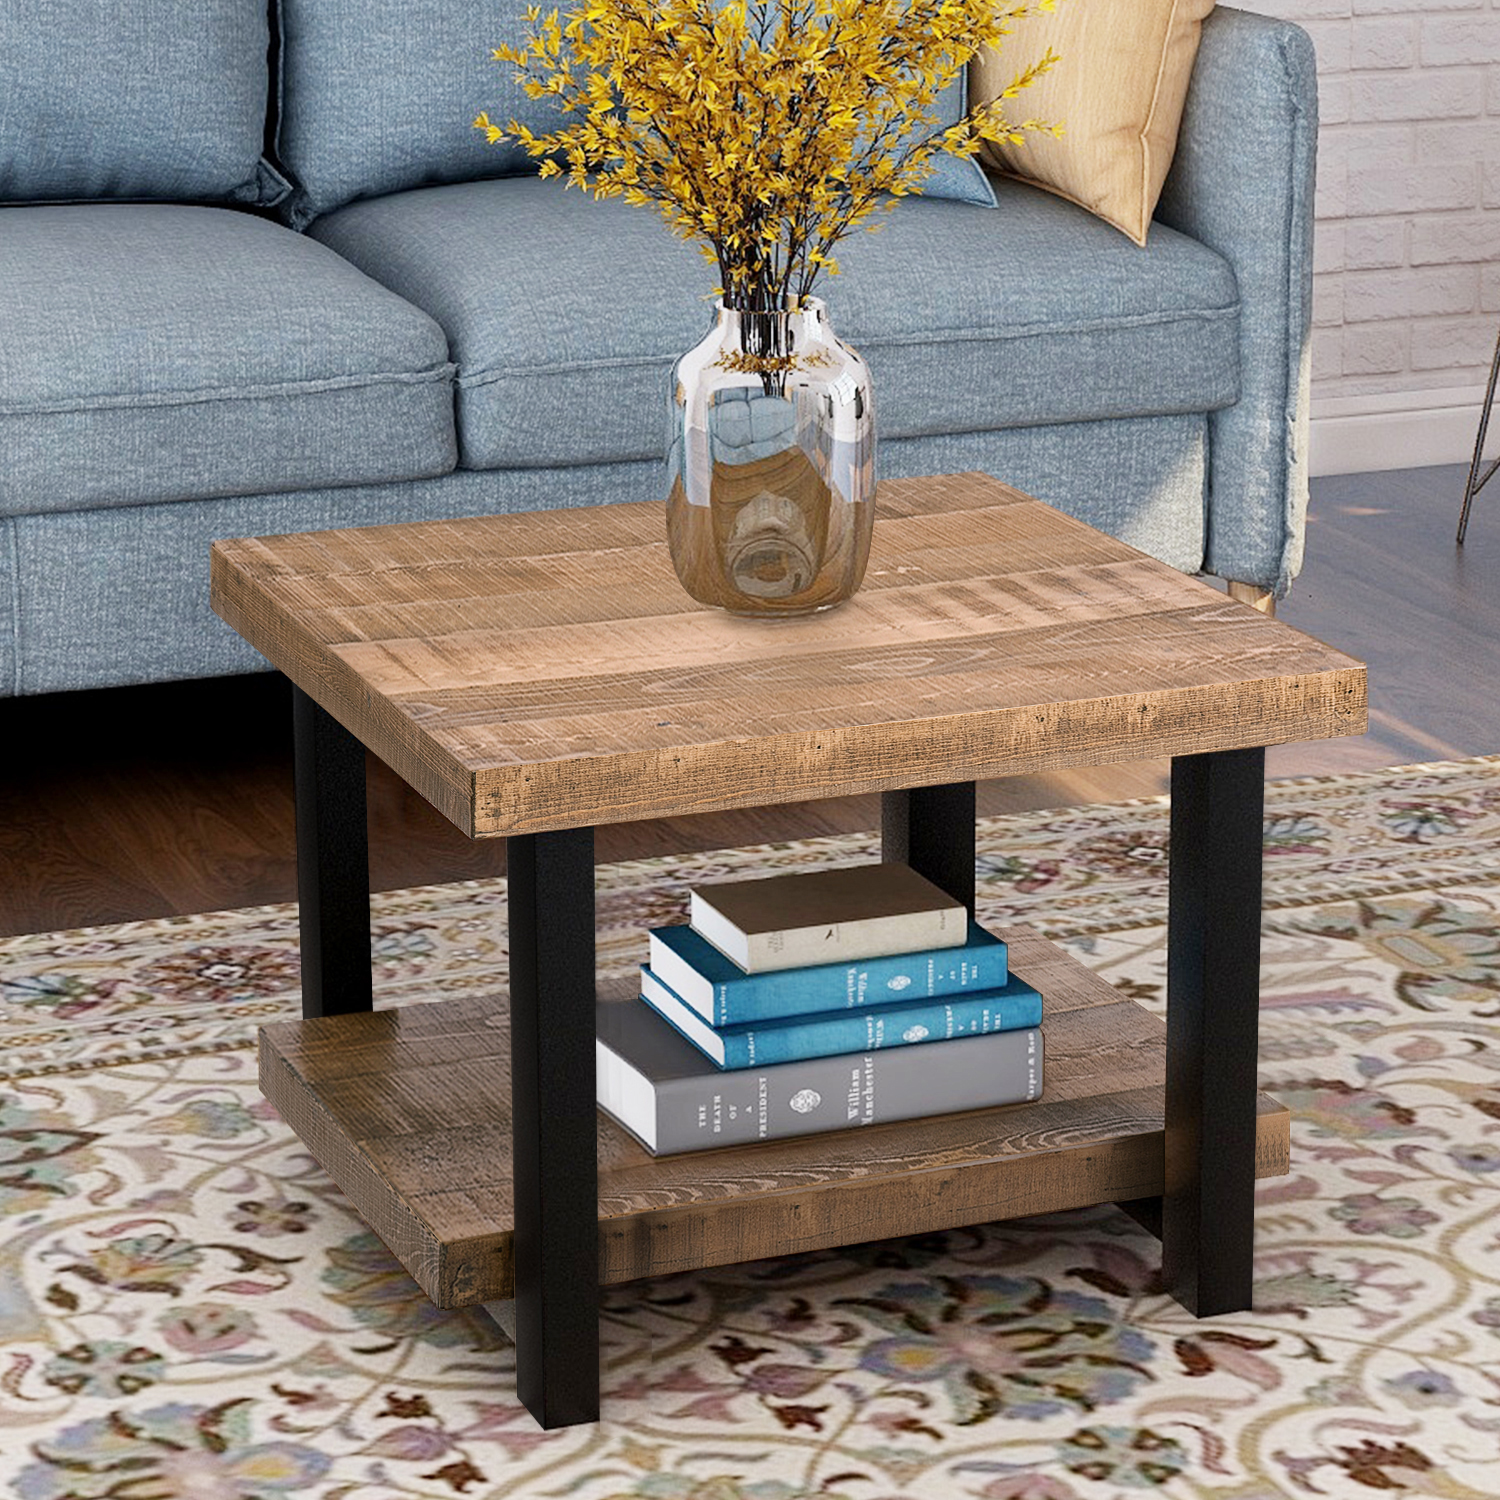 22"x22" Rustic Natural Coffee Table With Storage Shelf - WF192552AAD